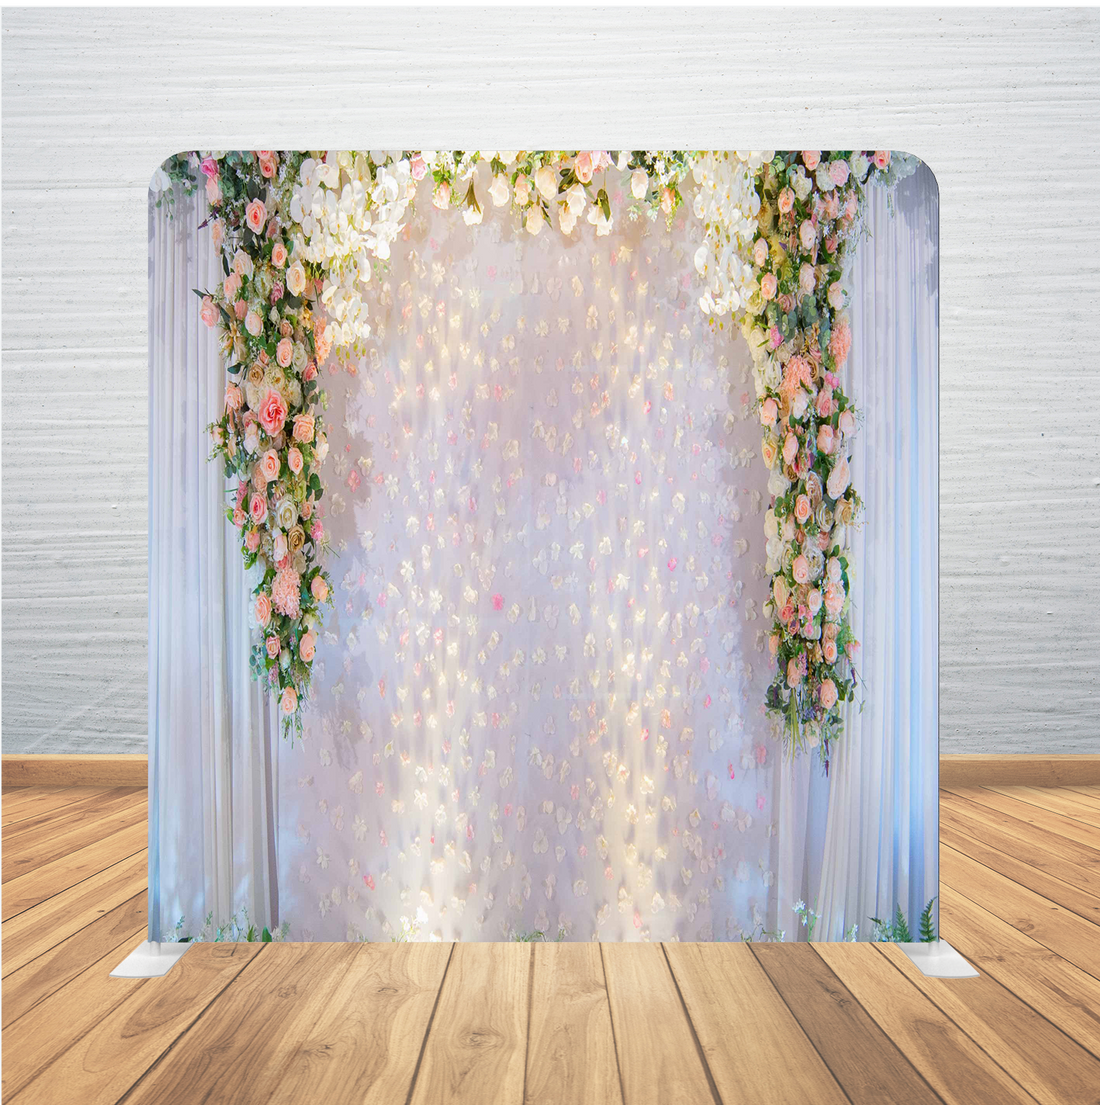 8X8 Pillowcase Tension Backdrop- Floral Sides with Drapery